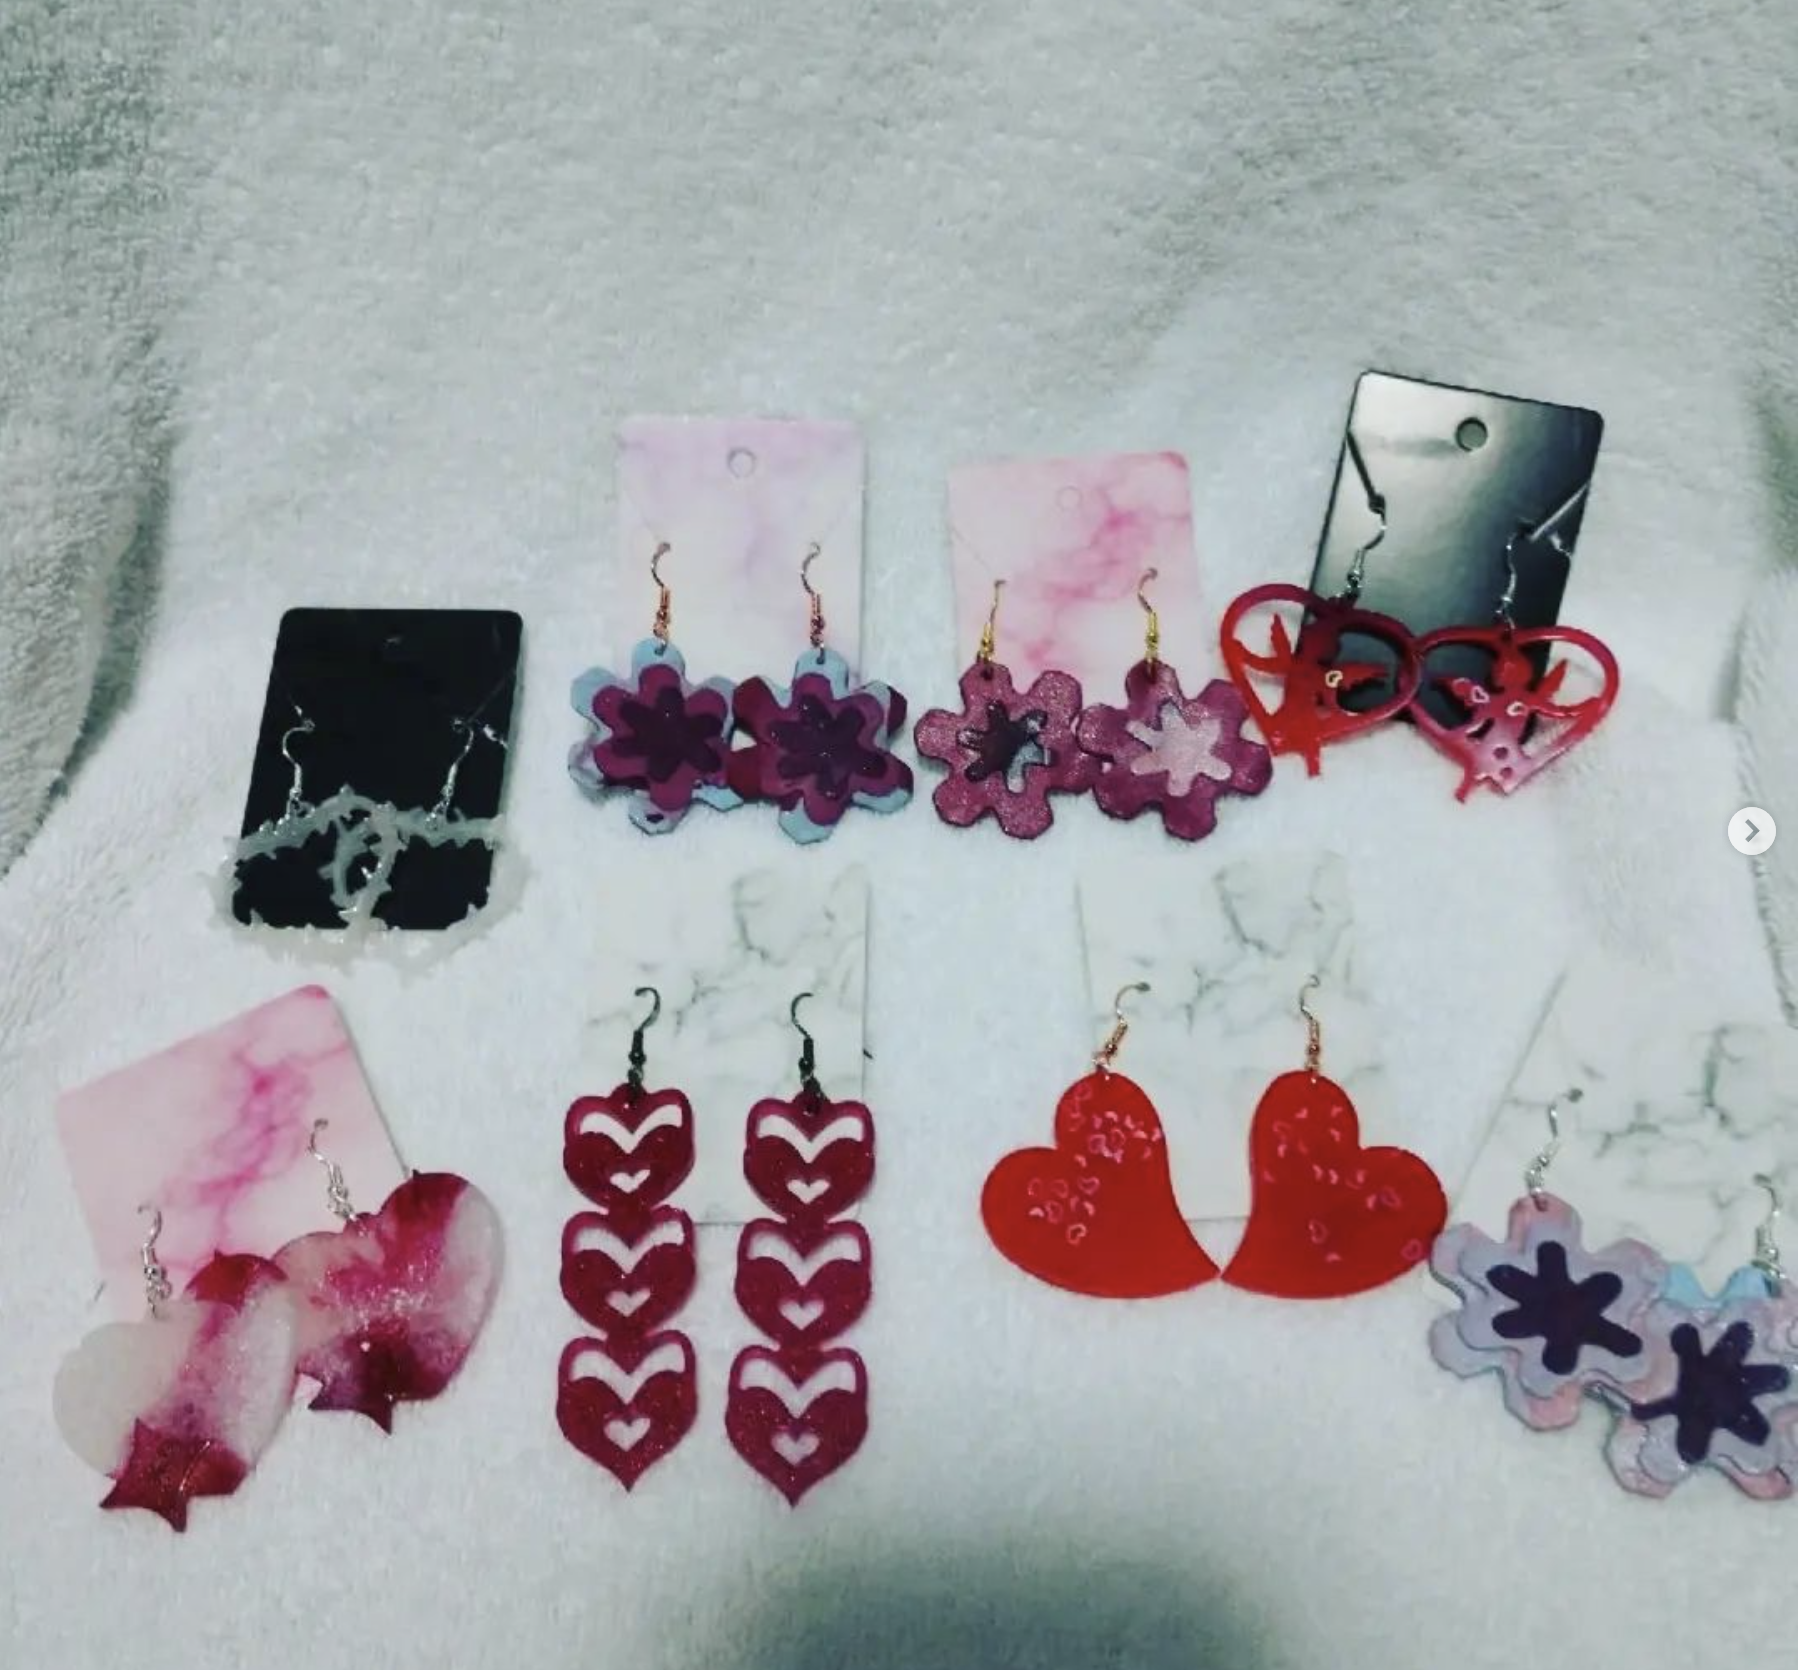 custom earrings by jay jays unique creations